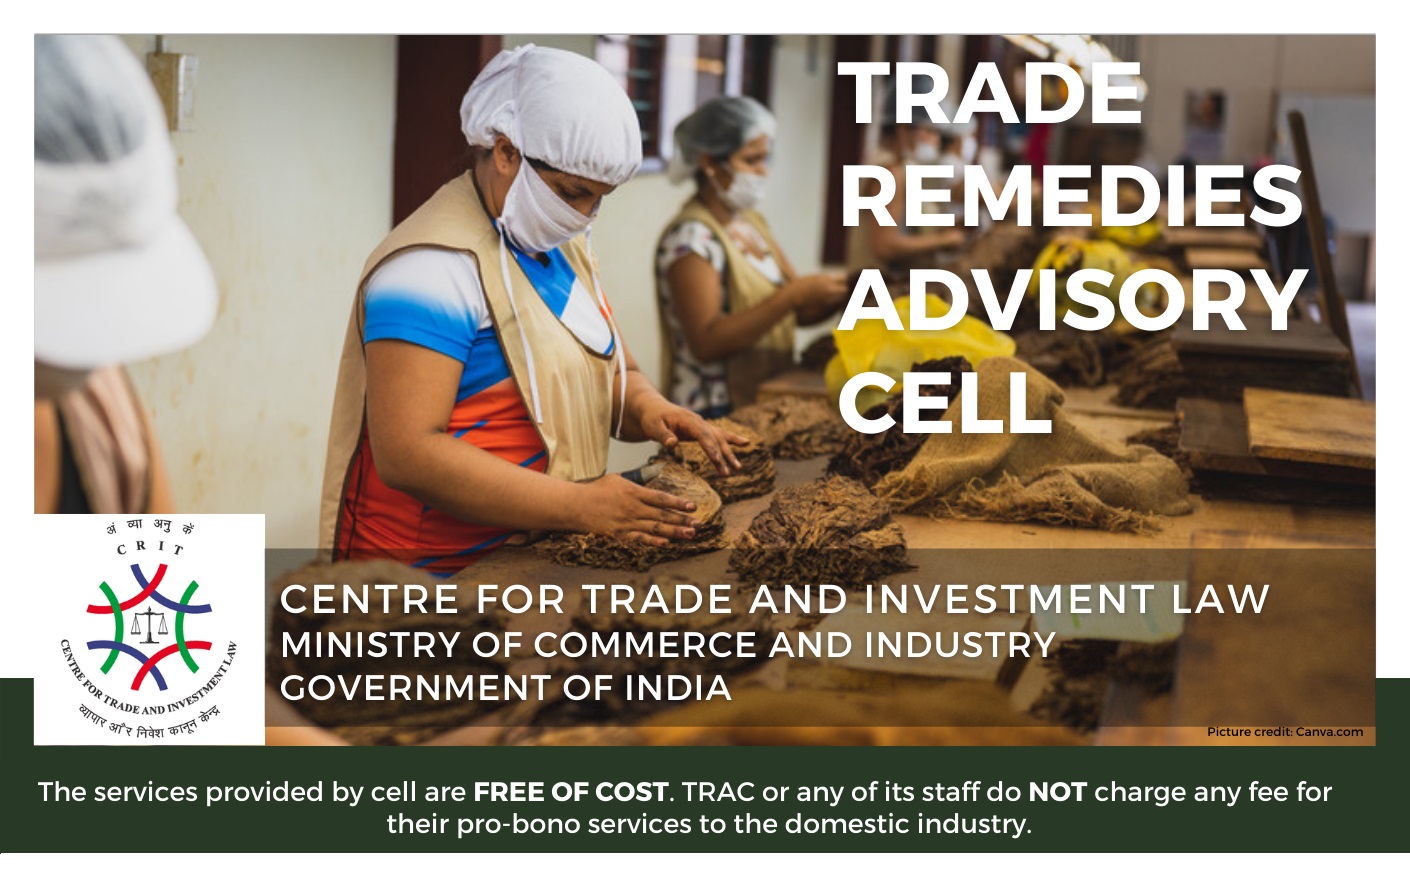 Trade Remedies Advisory Cell (TRAC)